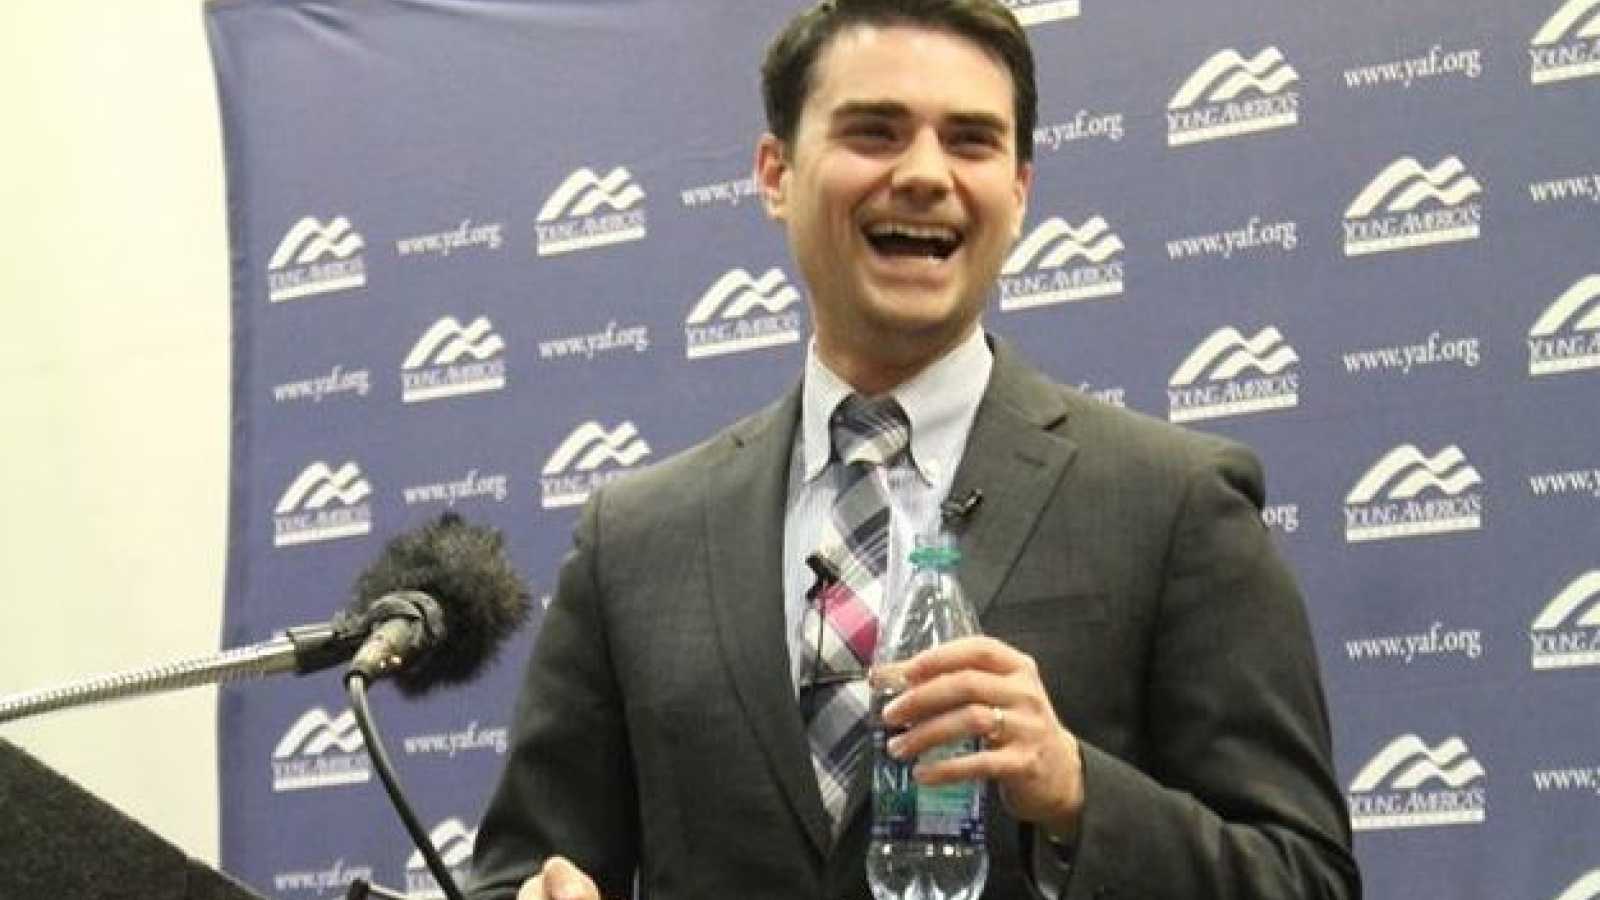 Pro-vax Ben Shapiro FINALLY admits he was wrong about vaccine effectiveness – what took so long?